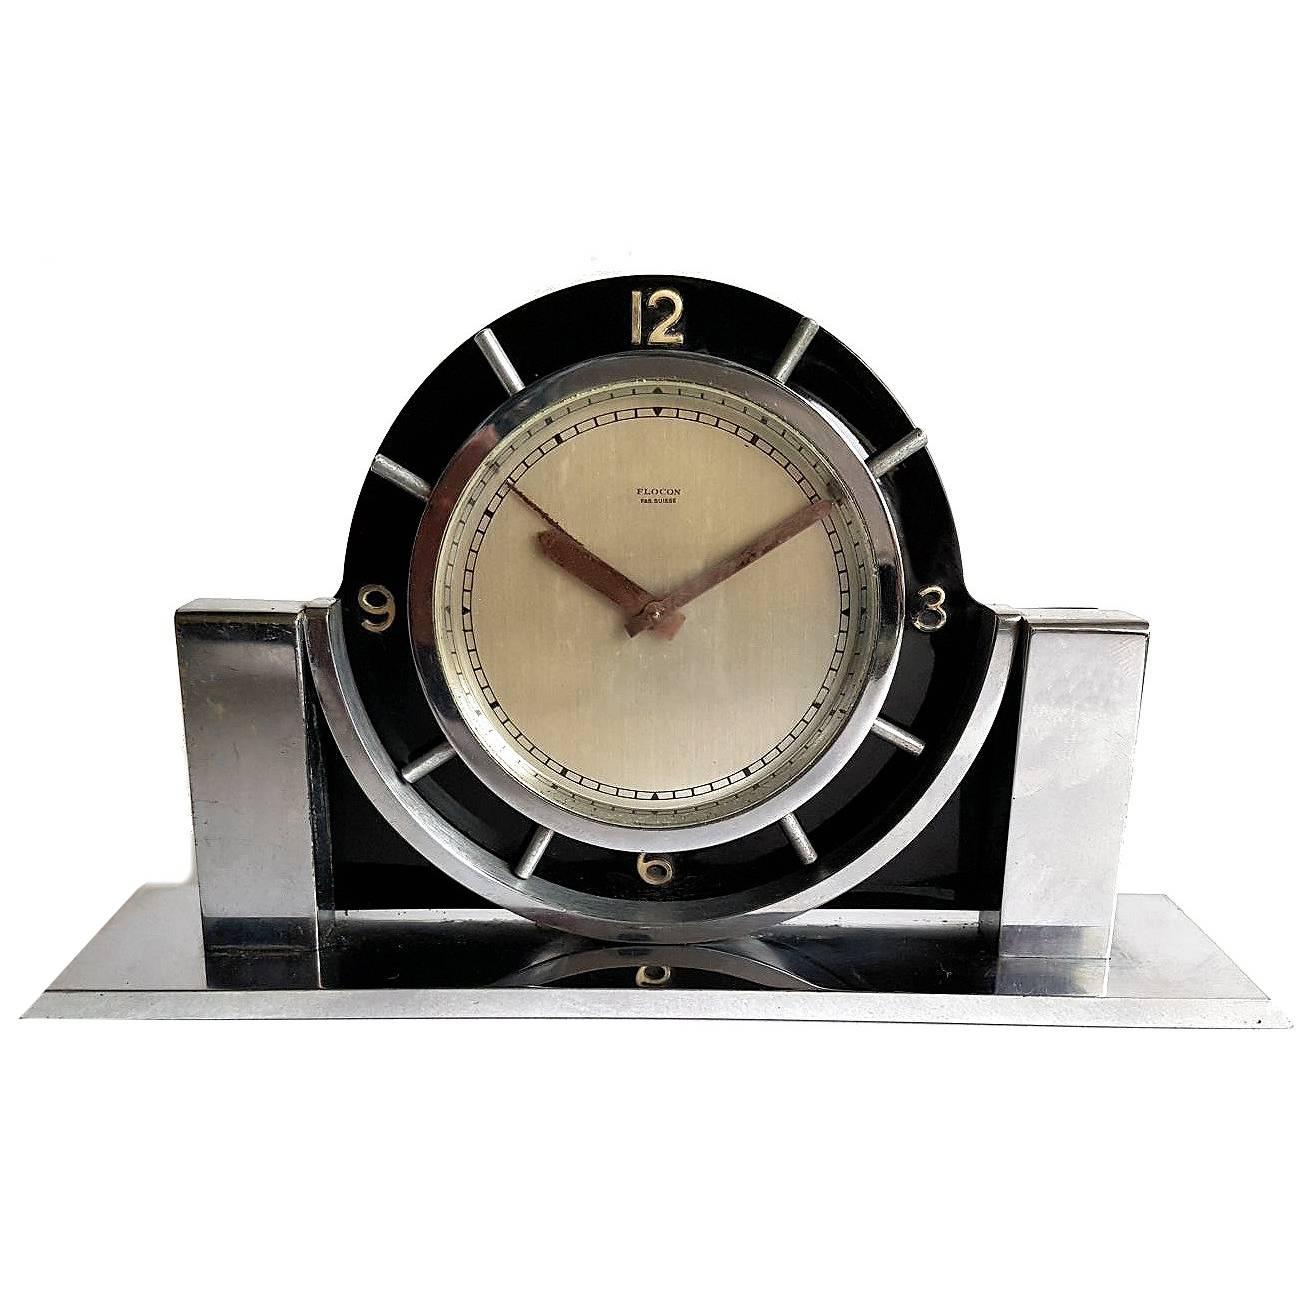 Art Deco Modernist ImHof Eight Day Alarm Clock in Black Celluloid and Chrome